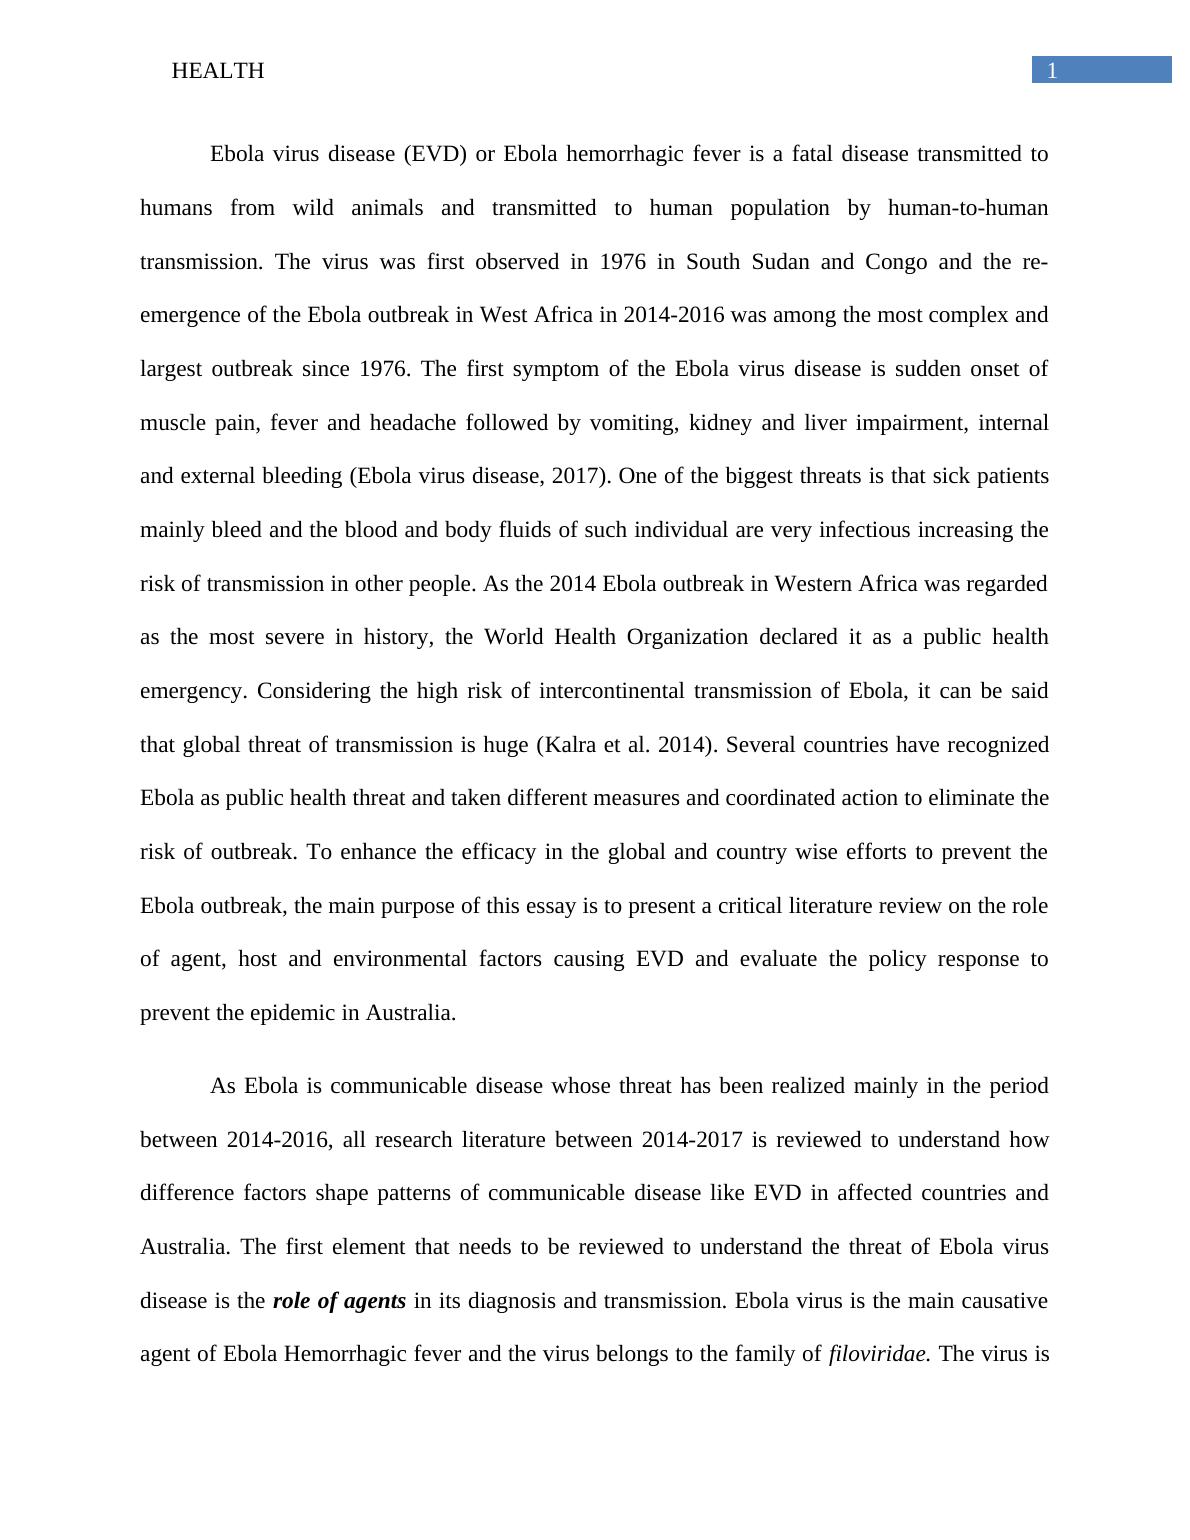 Essay on Ebola Outbreak Prevention_2